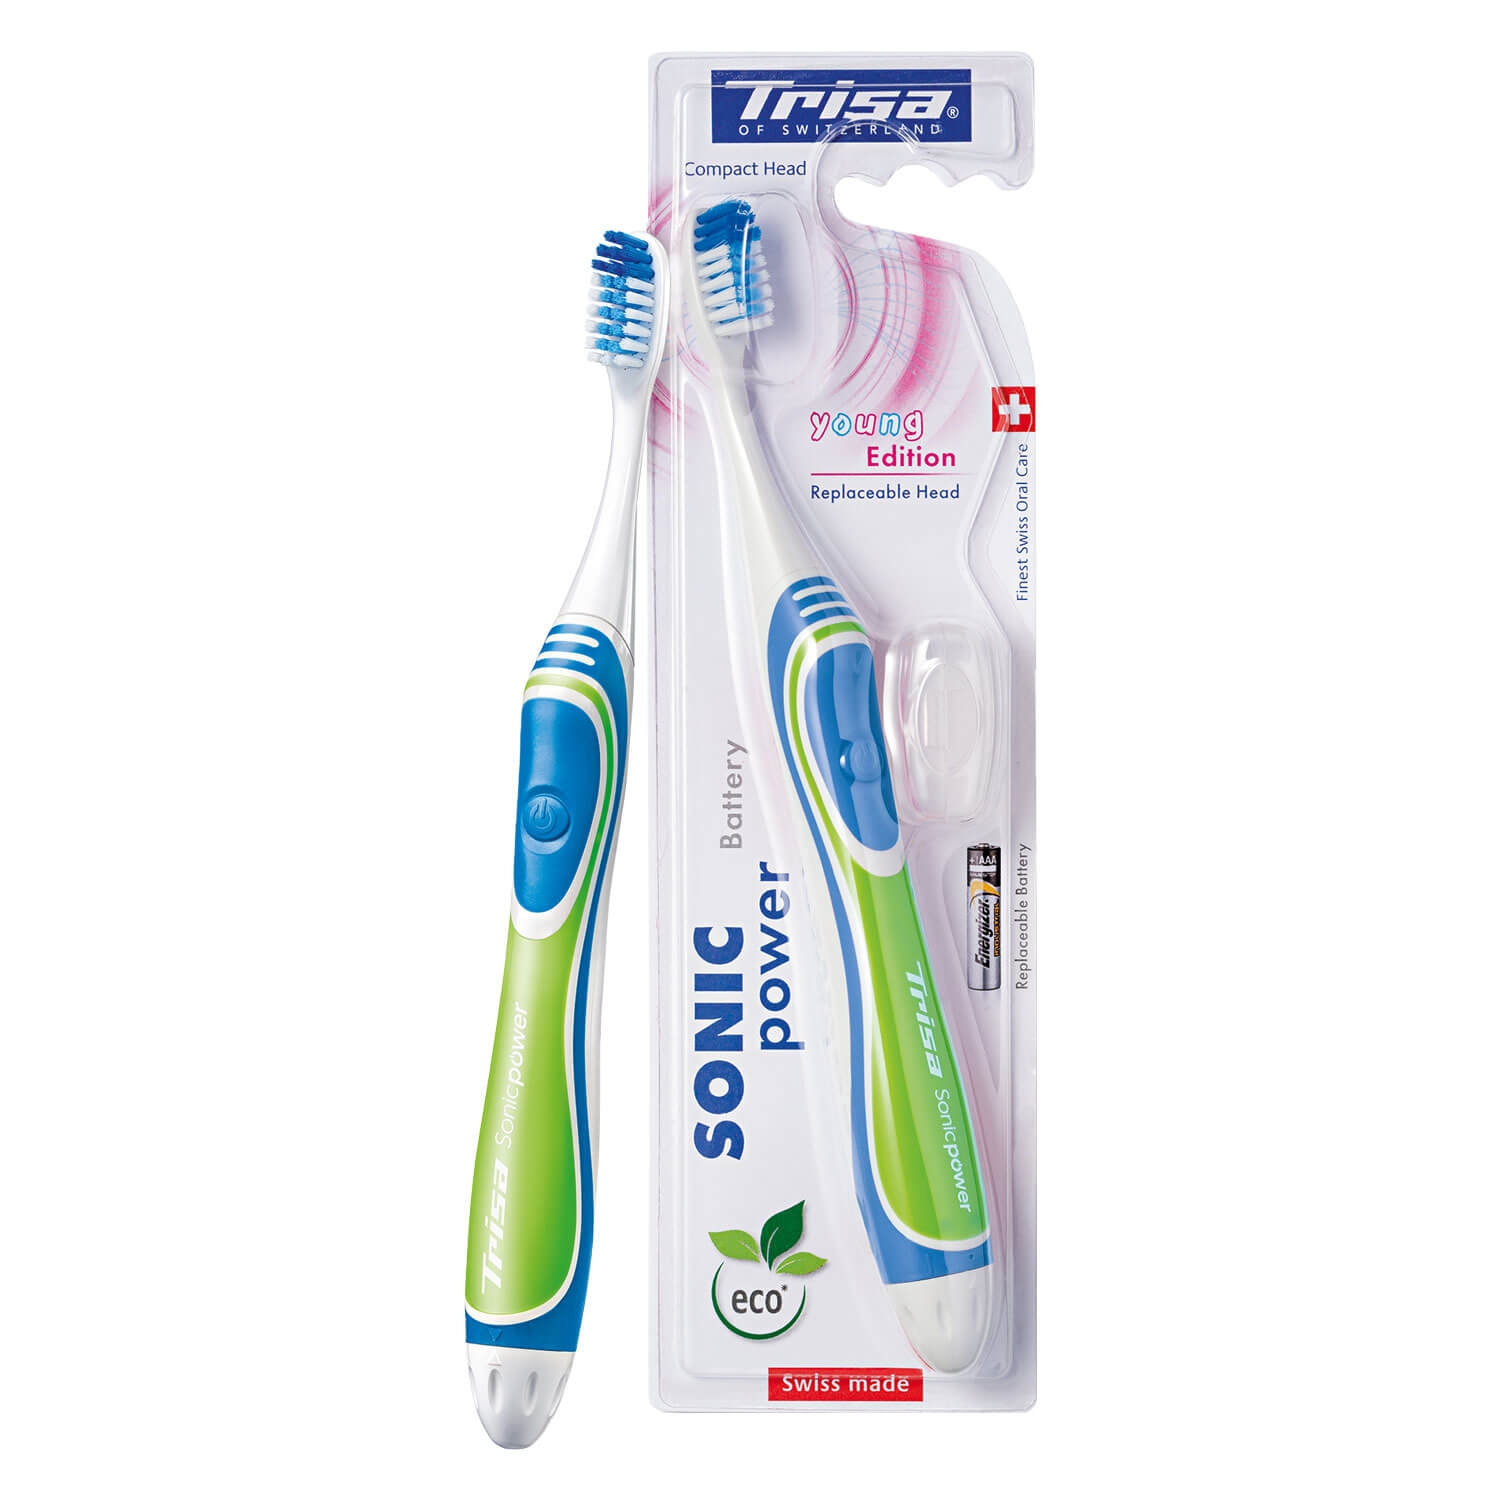 Produktbild von Trisa Oral Care - Sonic Power Battery Young Edition Compact Head